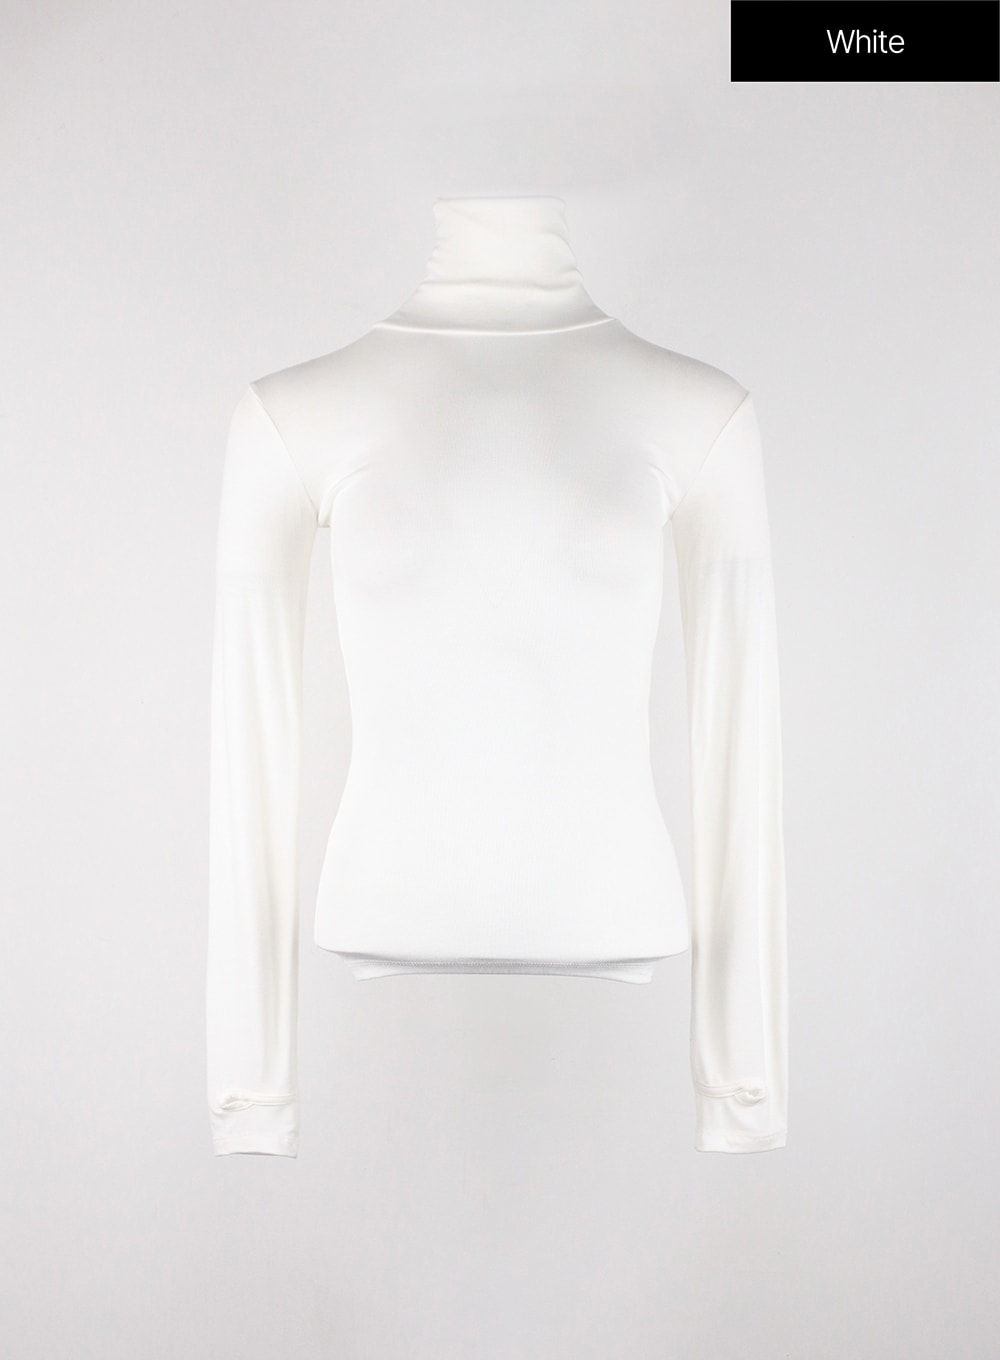 Turtleneck Thumb Holes Top #Ivory One Size(S-M) 